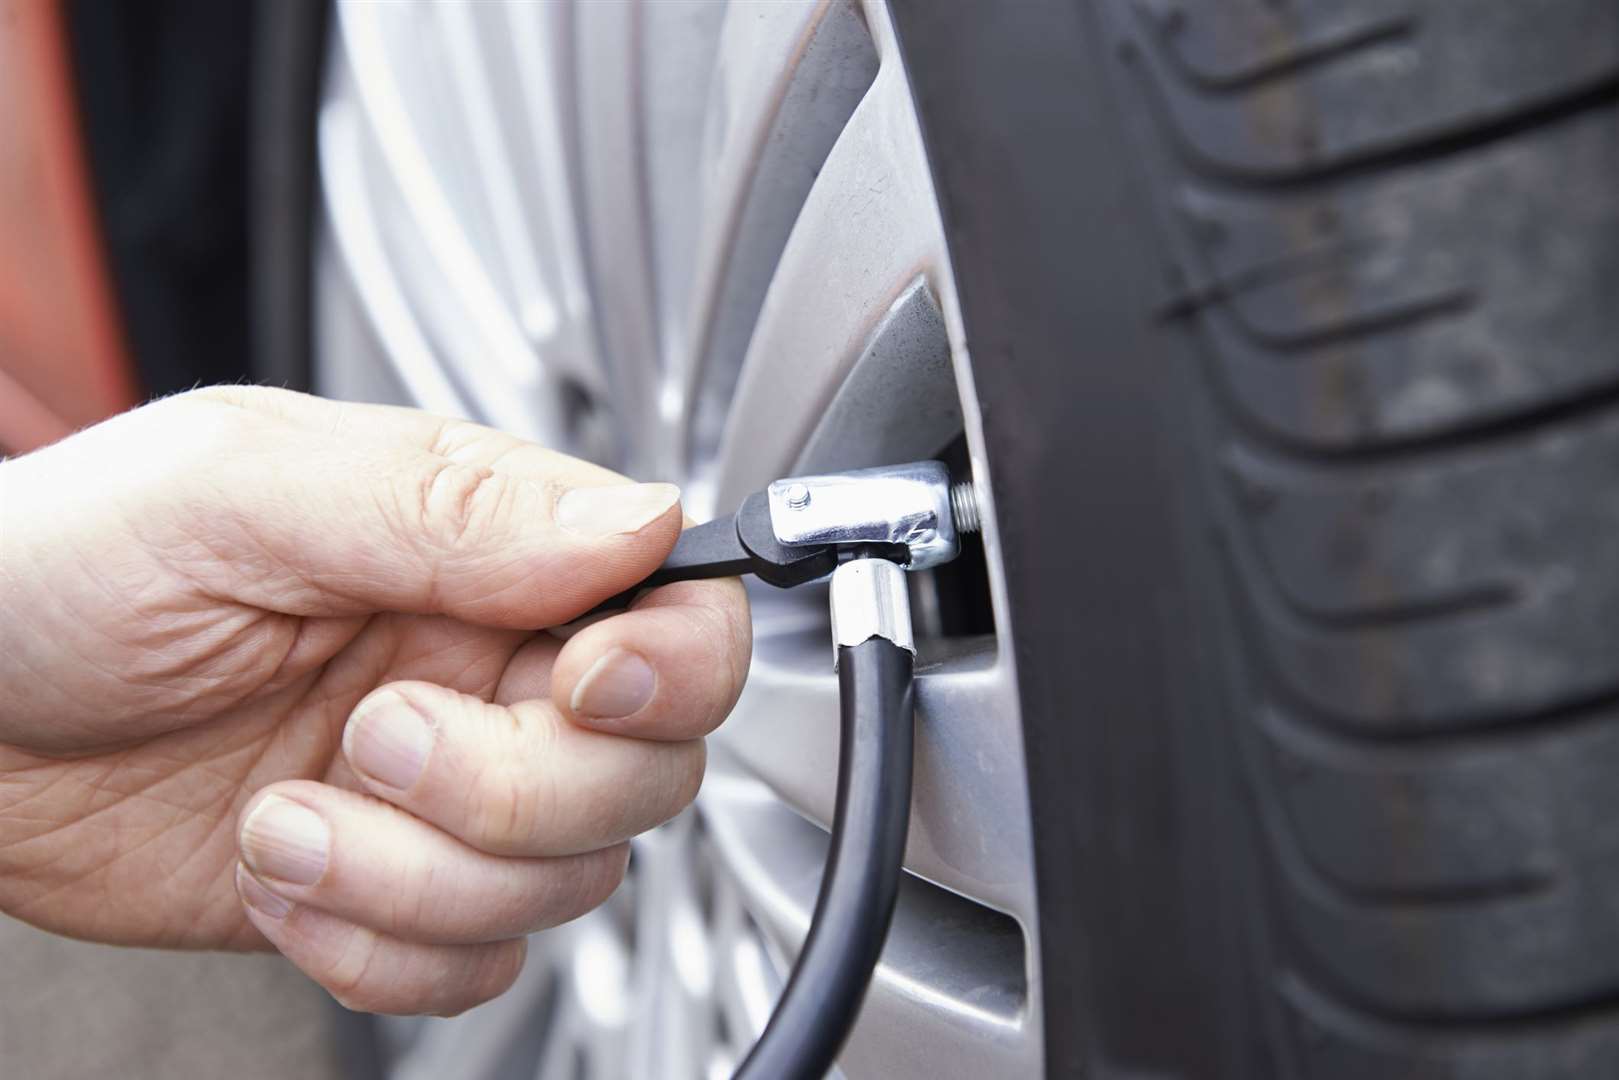 Keeping your tyres in good condition will help your environmental footprint